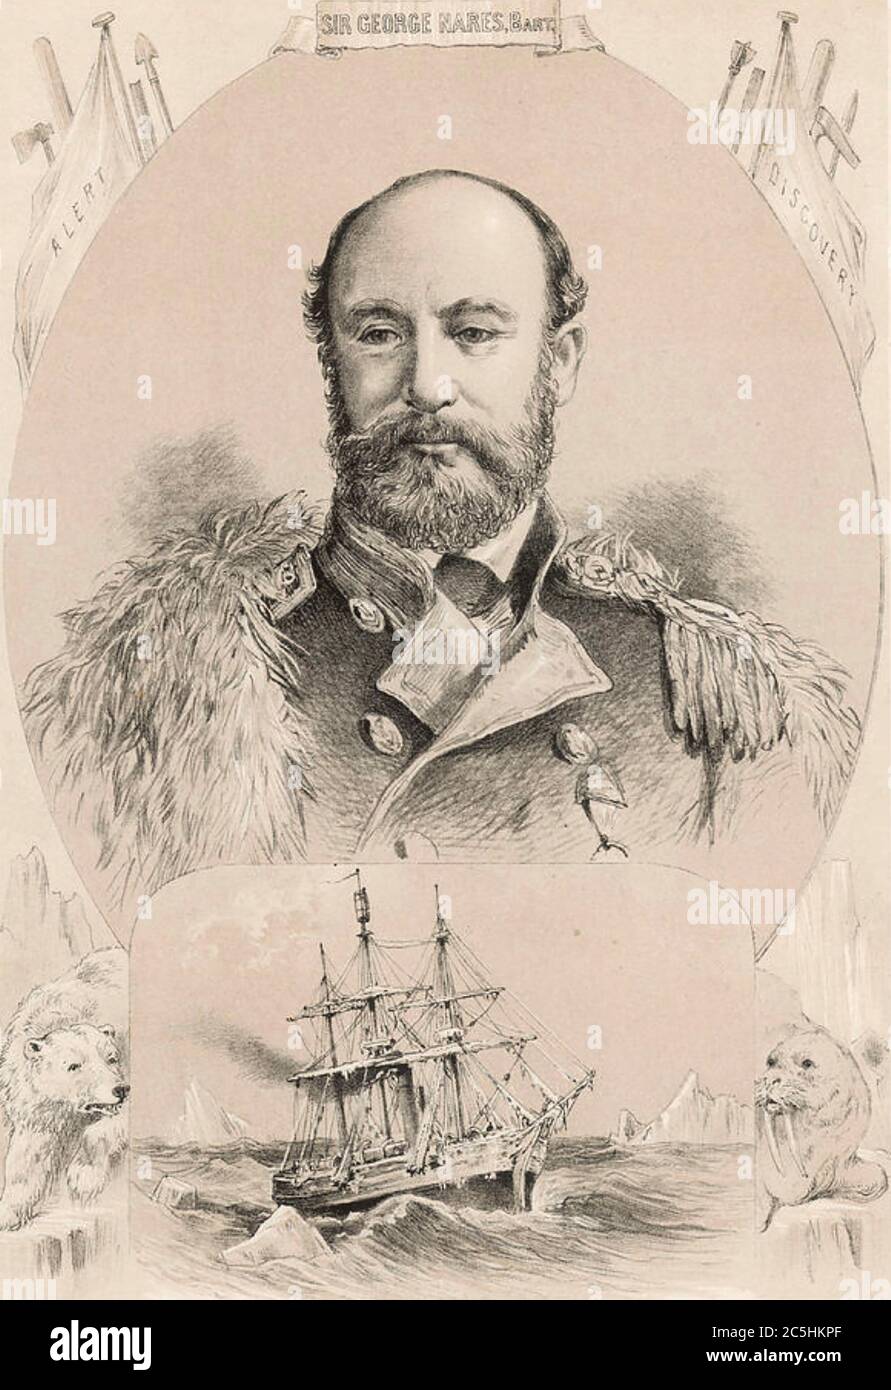 GEORGE NARES (1831-1915) Royal Navy officer and Arctic explorer shown here with his ship HMS Challenger Stock Photo